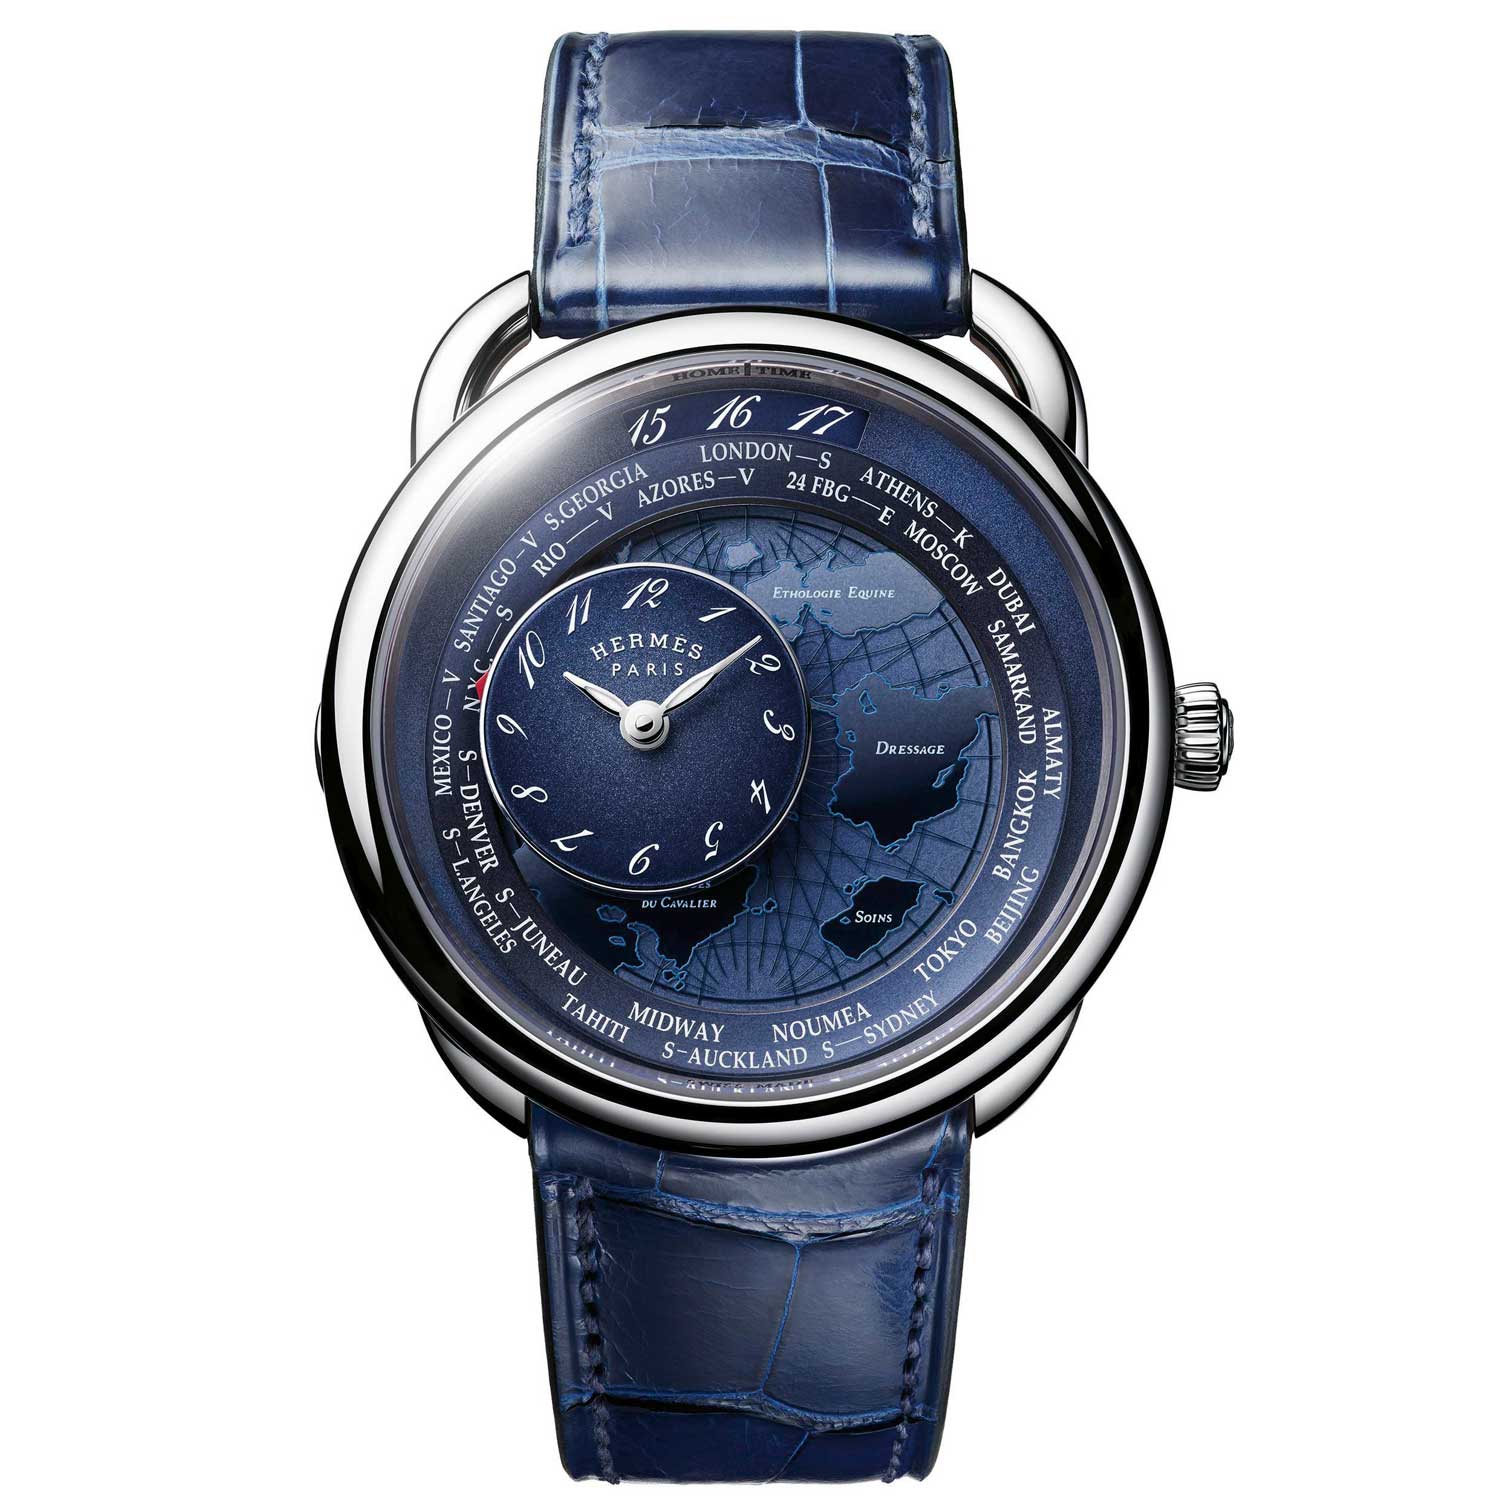 The Arceau Le Temps Voyageur has a satellite subdial that displays local time, which is automatically updated once the dial aligns with the city ring